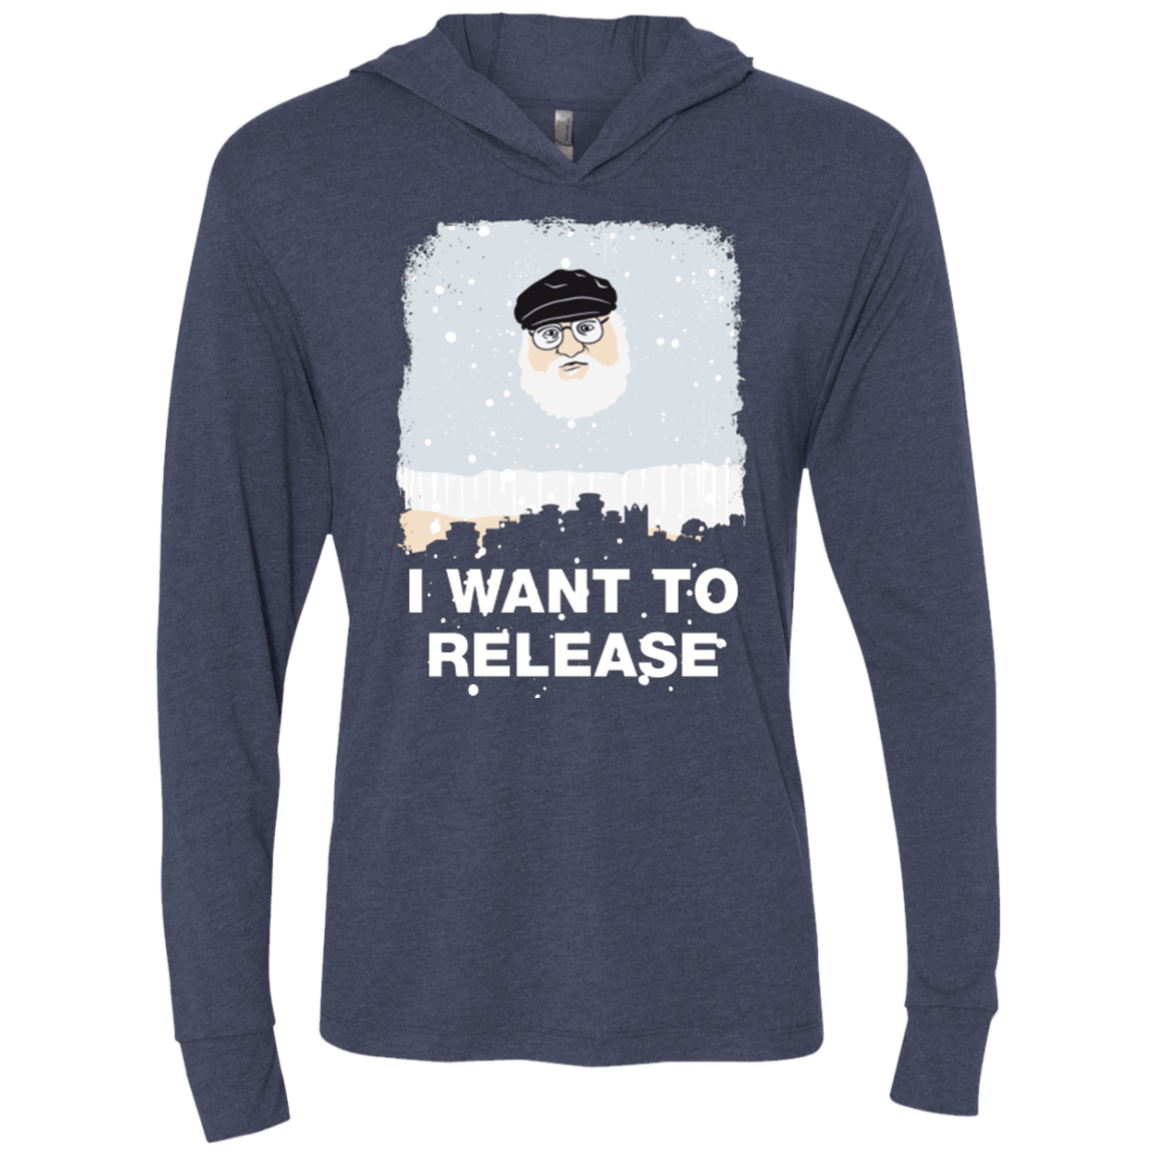 T-Shirts Vintage Navy / X-Small I Want to Release Triblend Long Sleeve Hoodie Tee